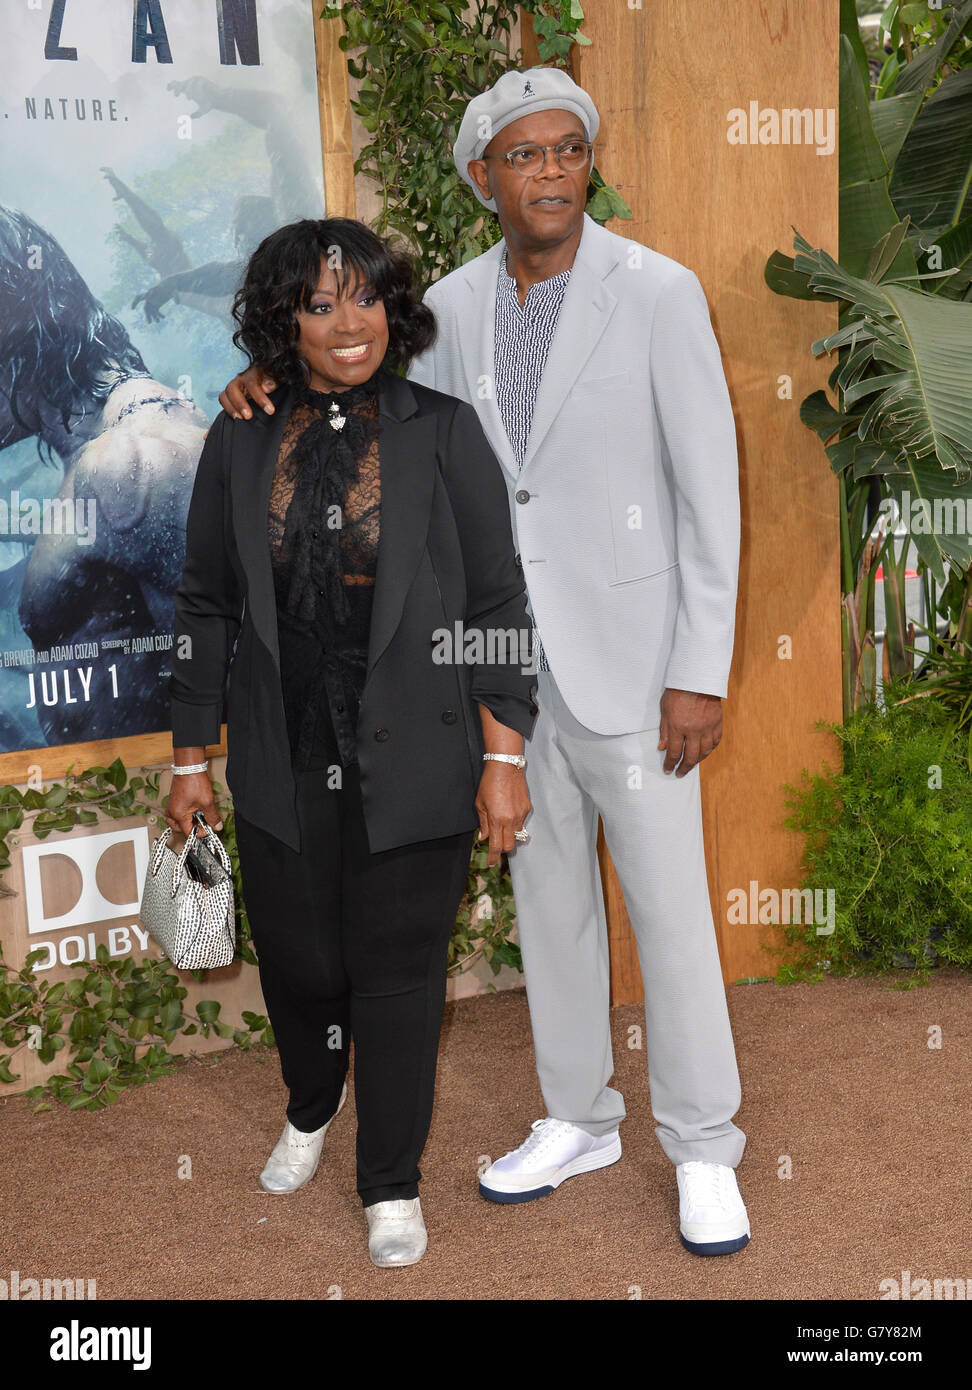 Los Angeles, USA. 27th June, 2016. LOS ANGELES, CA. June 27, 2016: Actor Samuel L. Jackson & wife actress LaTanya Richardson Jackson at the world premiere of 'The Legend of Tarzan' at the Dolby Theatre, Hollywood. Credit:  Sarah Stewart/Alamy Live News Stock Photo